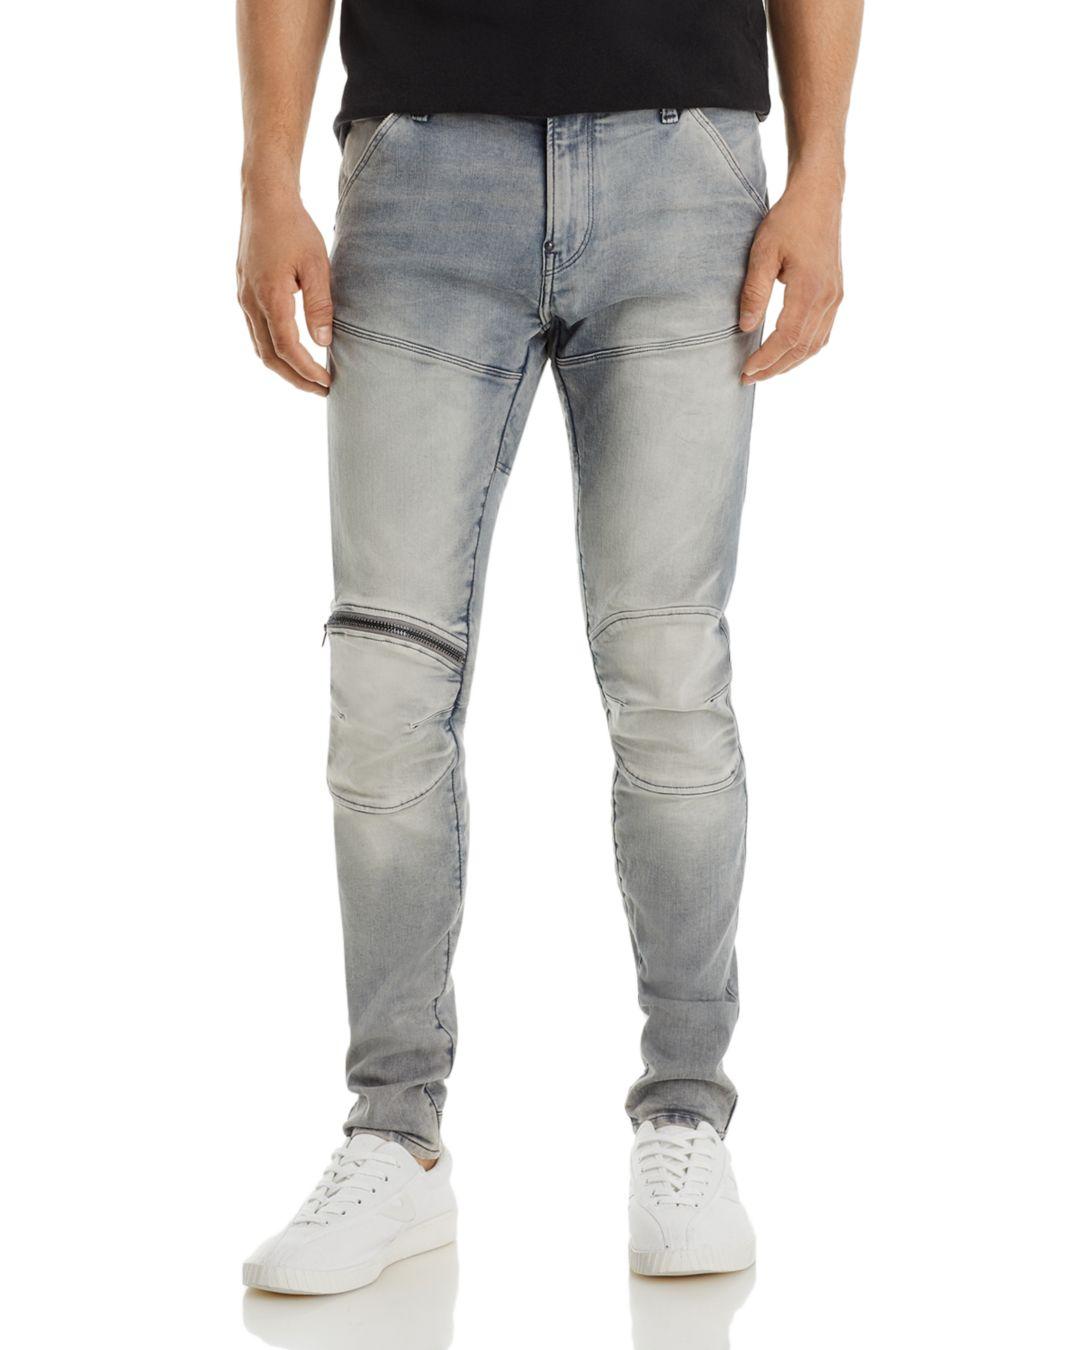 G-Star RAW G - Star Raw 5620 3d Zip Knee Skinny Jeans In Antic Fade in Blue  for Men | Lyst